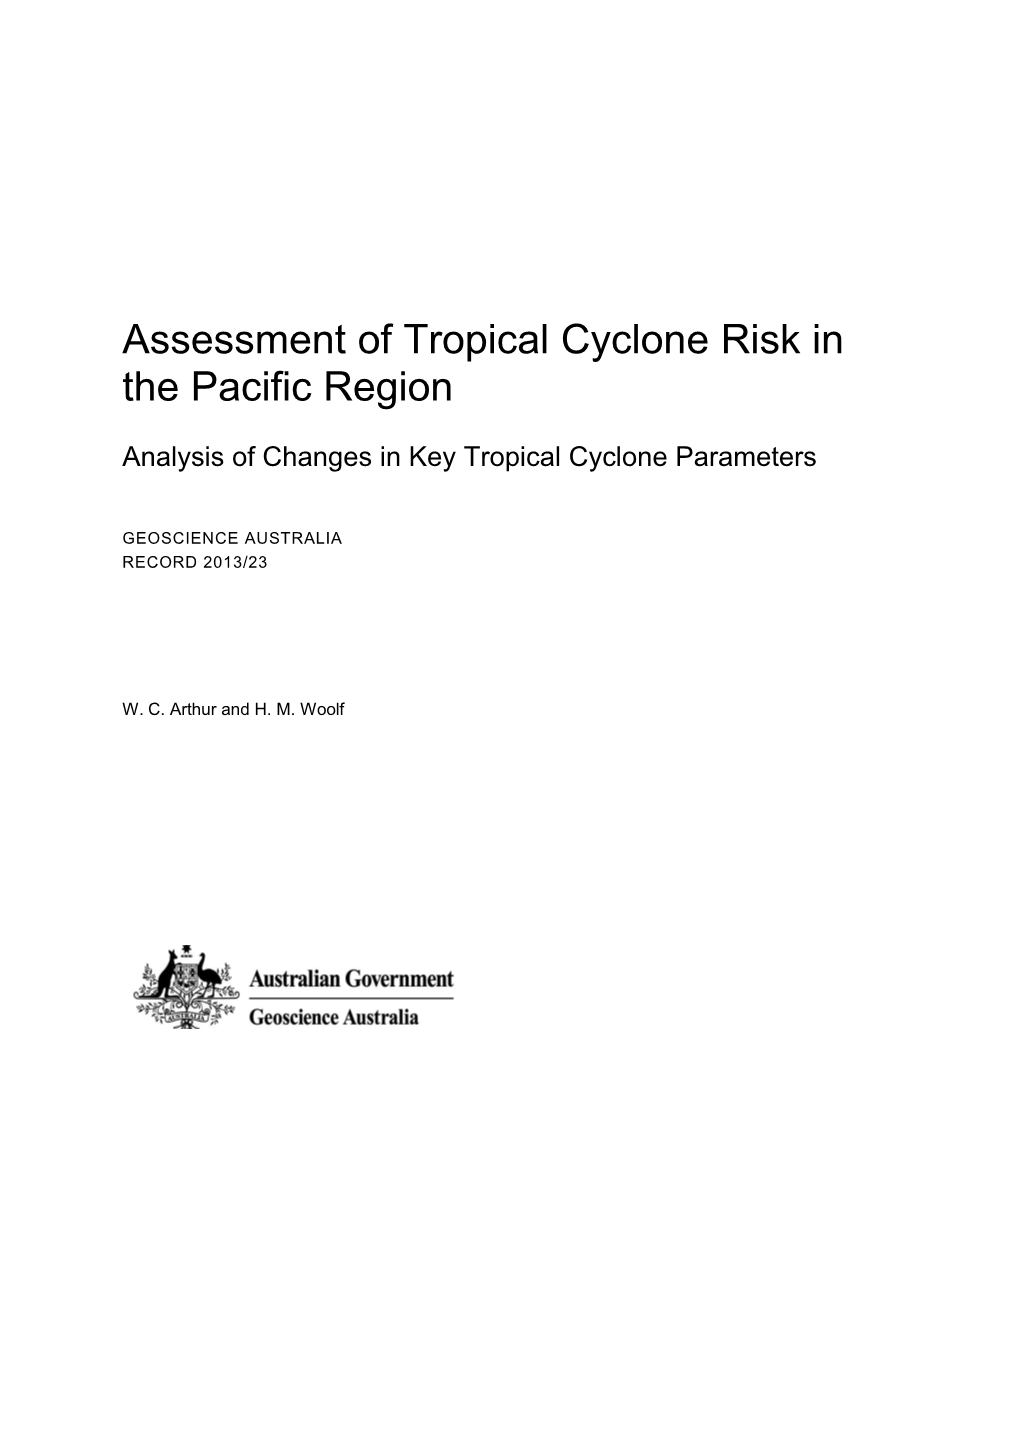 Tropical Cyclone Risk Assessment in the Pacific Region